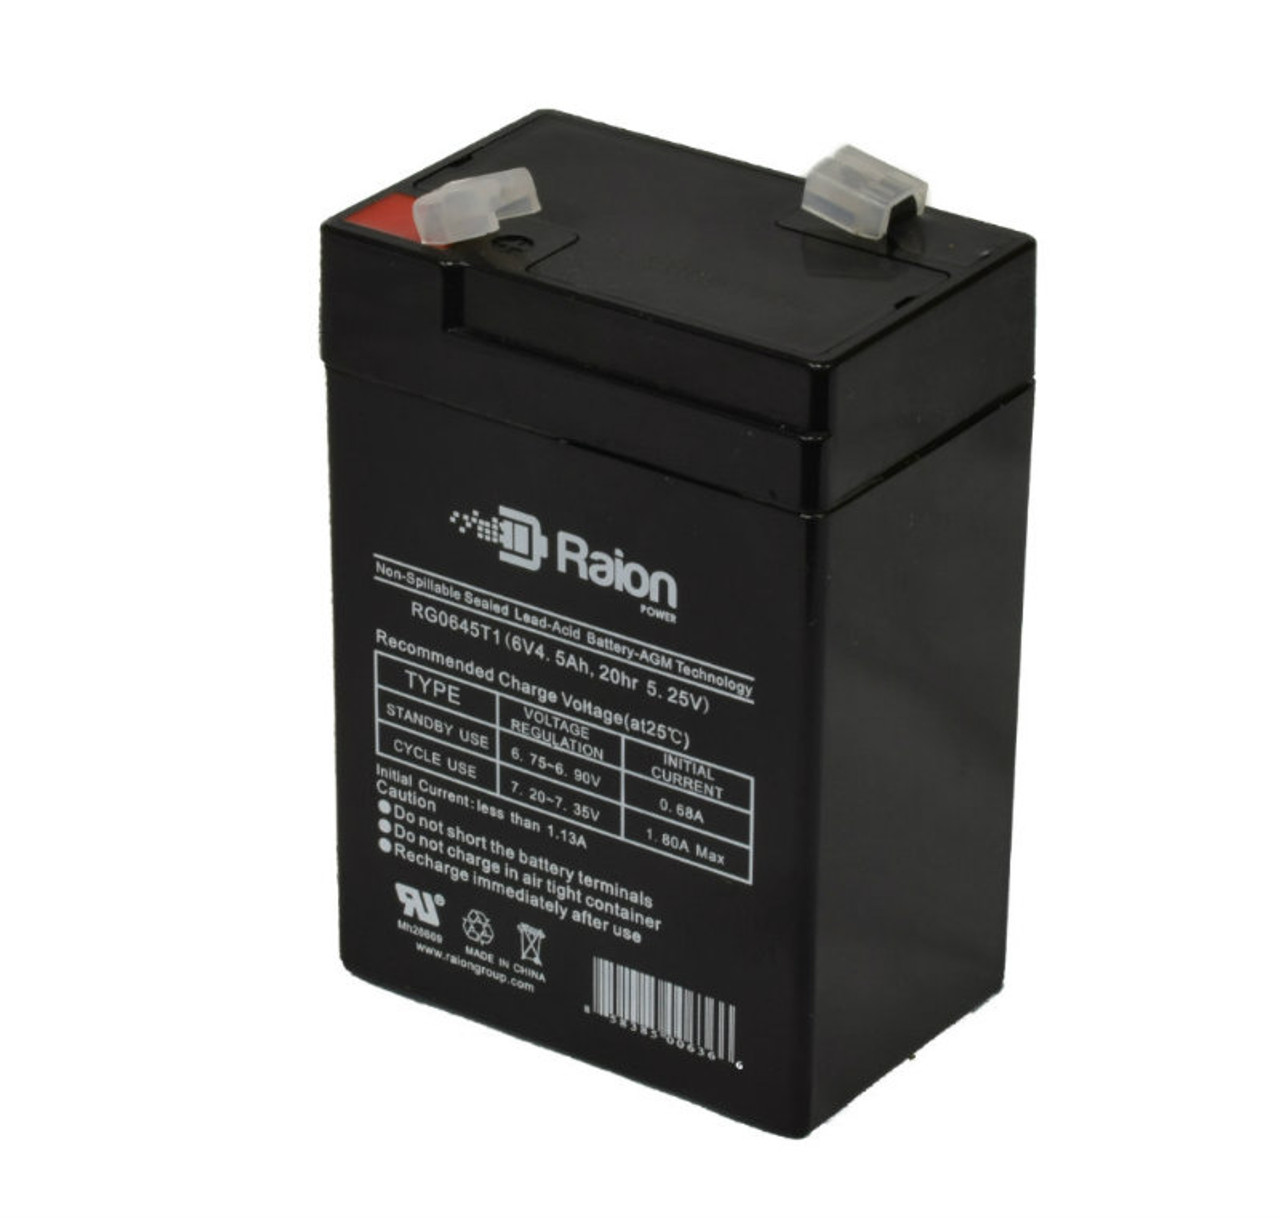 Raion Power RG0645T1 6V 4.5Ah Replacement Battery Cartridge for Power Energy GB6-4.2